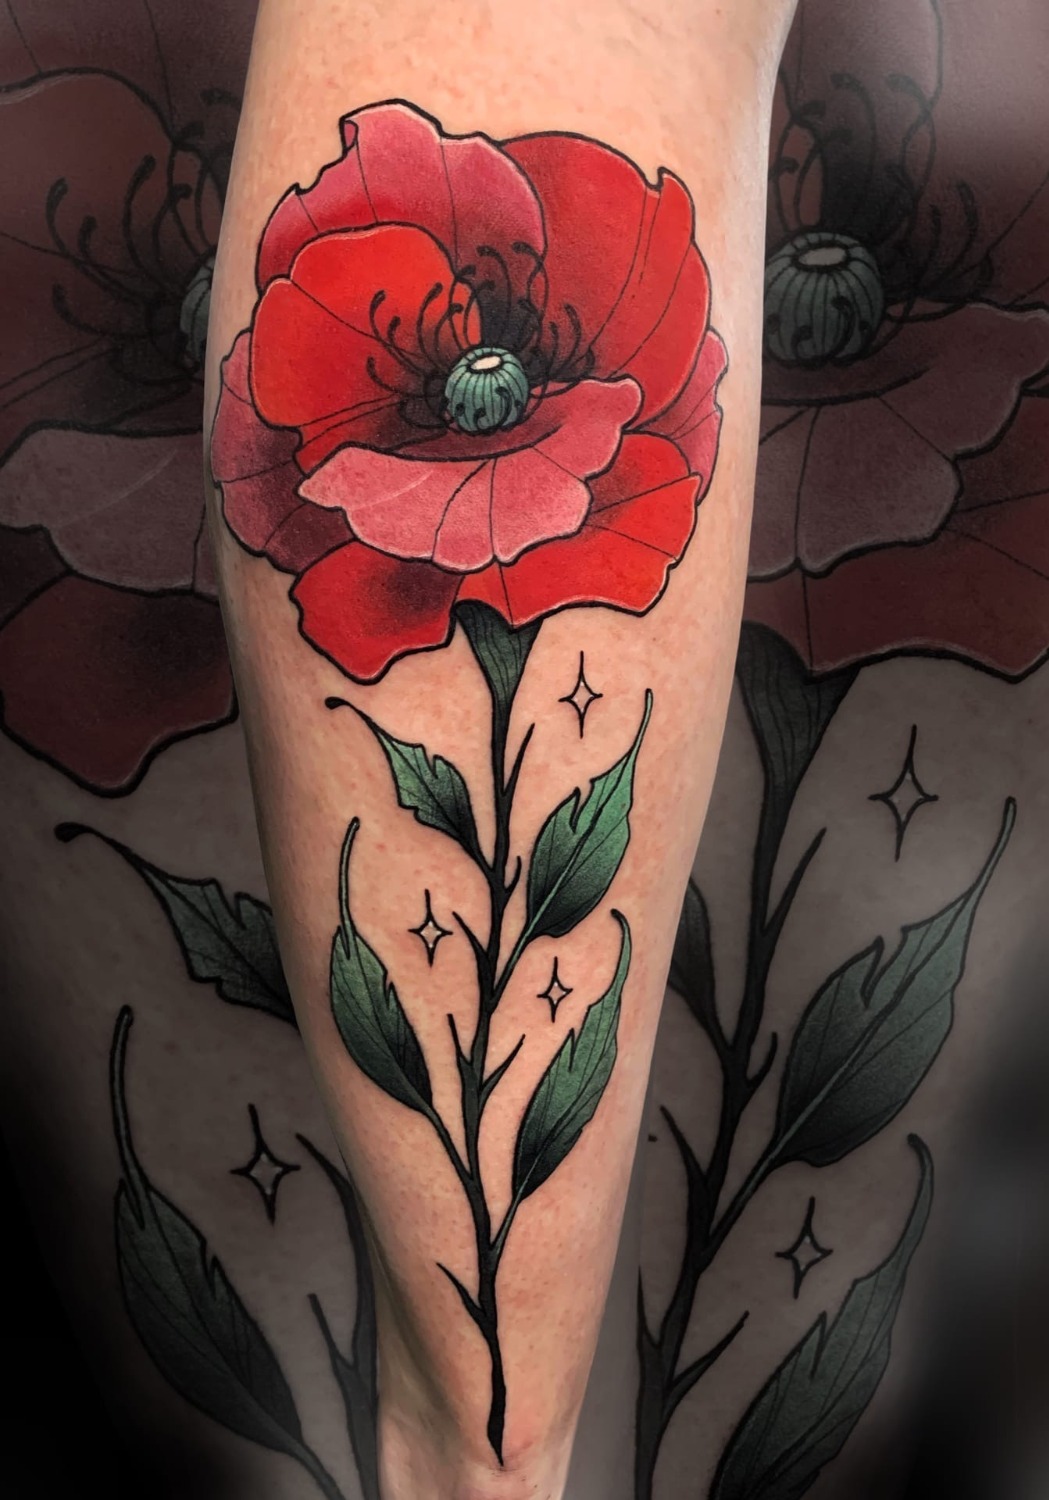 Traditional poppy done by Holly Woodn't at Seventh Seal, Parker FL. : r/ tattoos